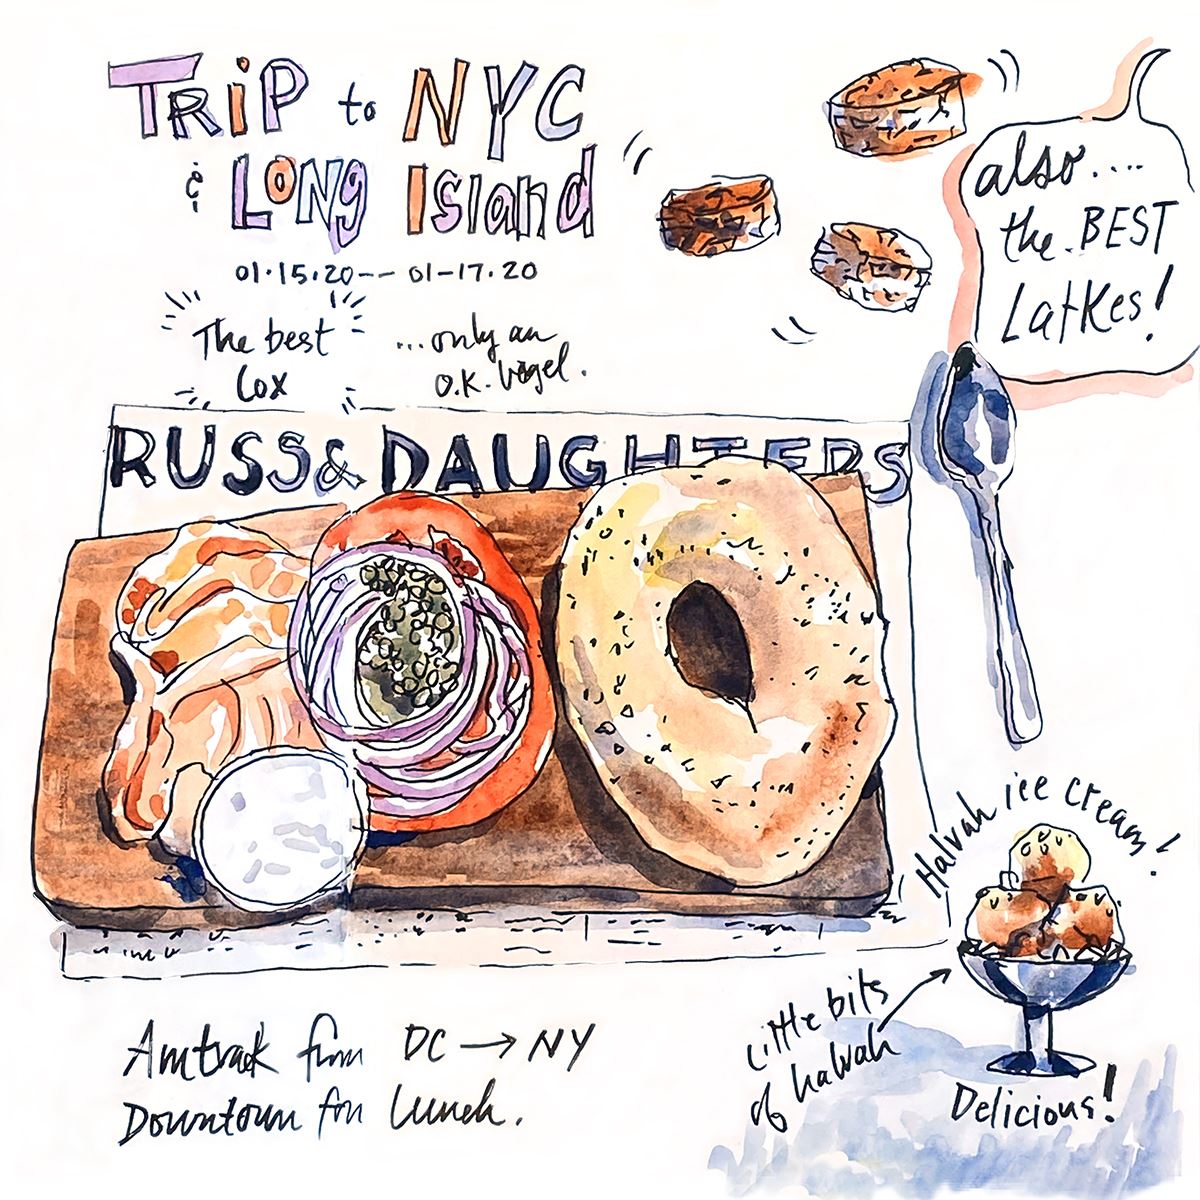 Watermedia illustration by Julia Rosenbaum, bagels with lox, hand written text signs and commentary